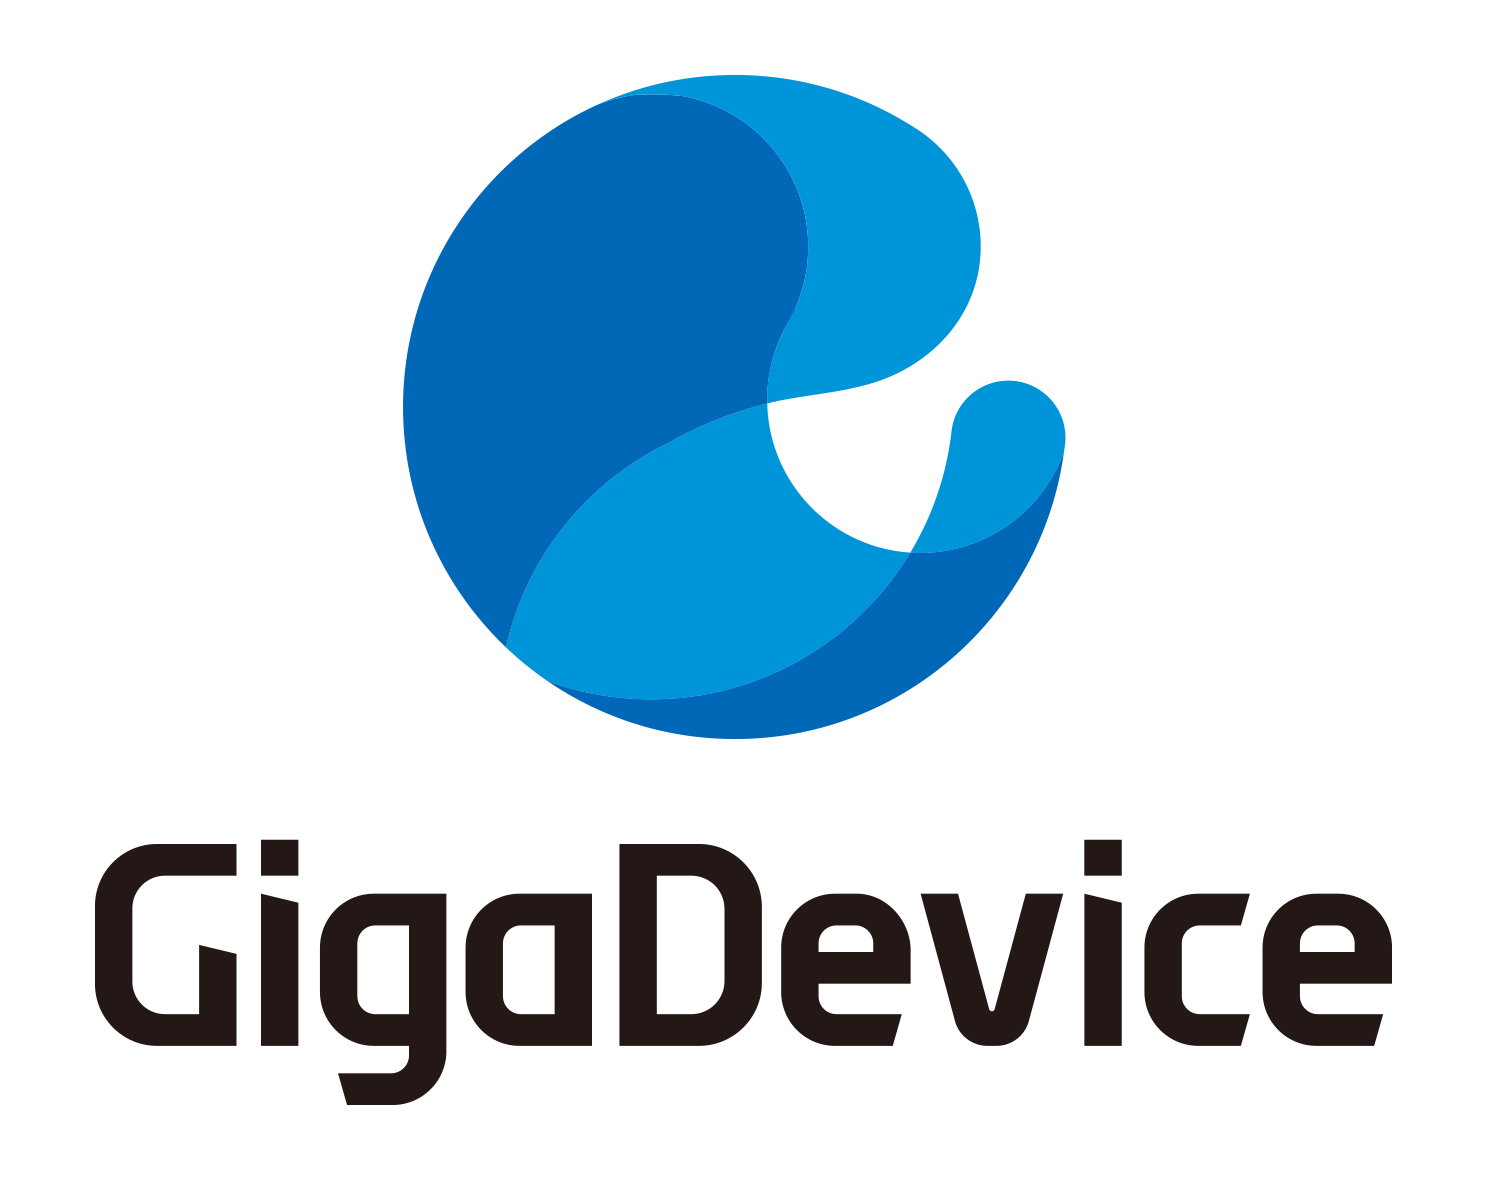 Experience the Power of Miniaturization: GigaDevice Unveils the Industry's Smallest 128Mb SPI NOR Flash in 3x3x0.4mm FO-USON8 Package 751d3c5f-ca8b-4c9a-8f1f-758b0f4b682a?size=1